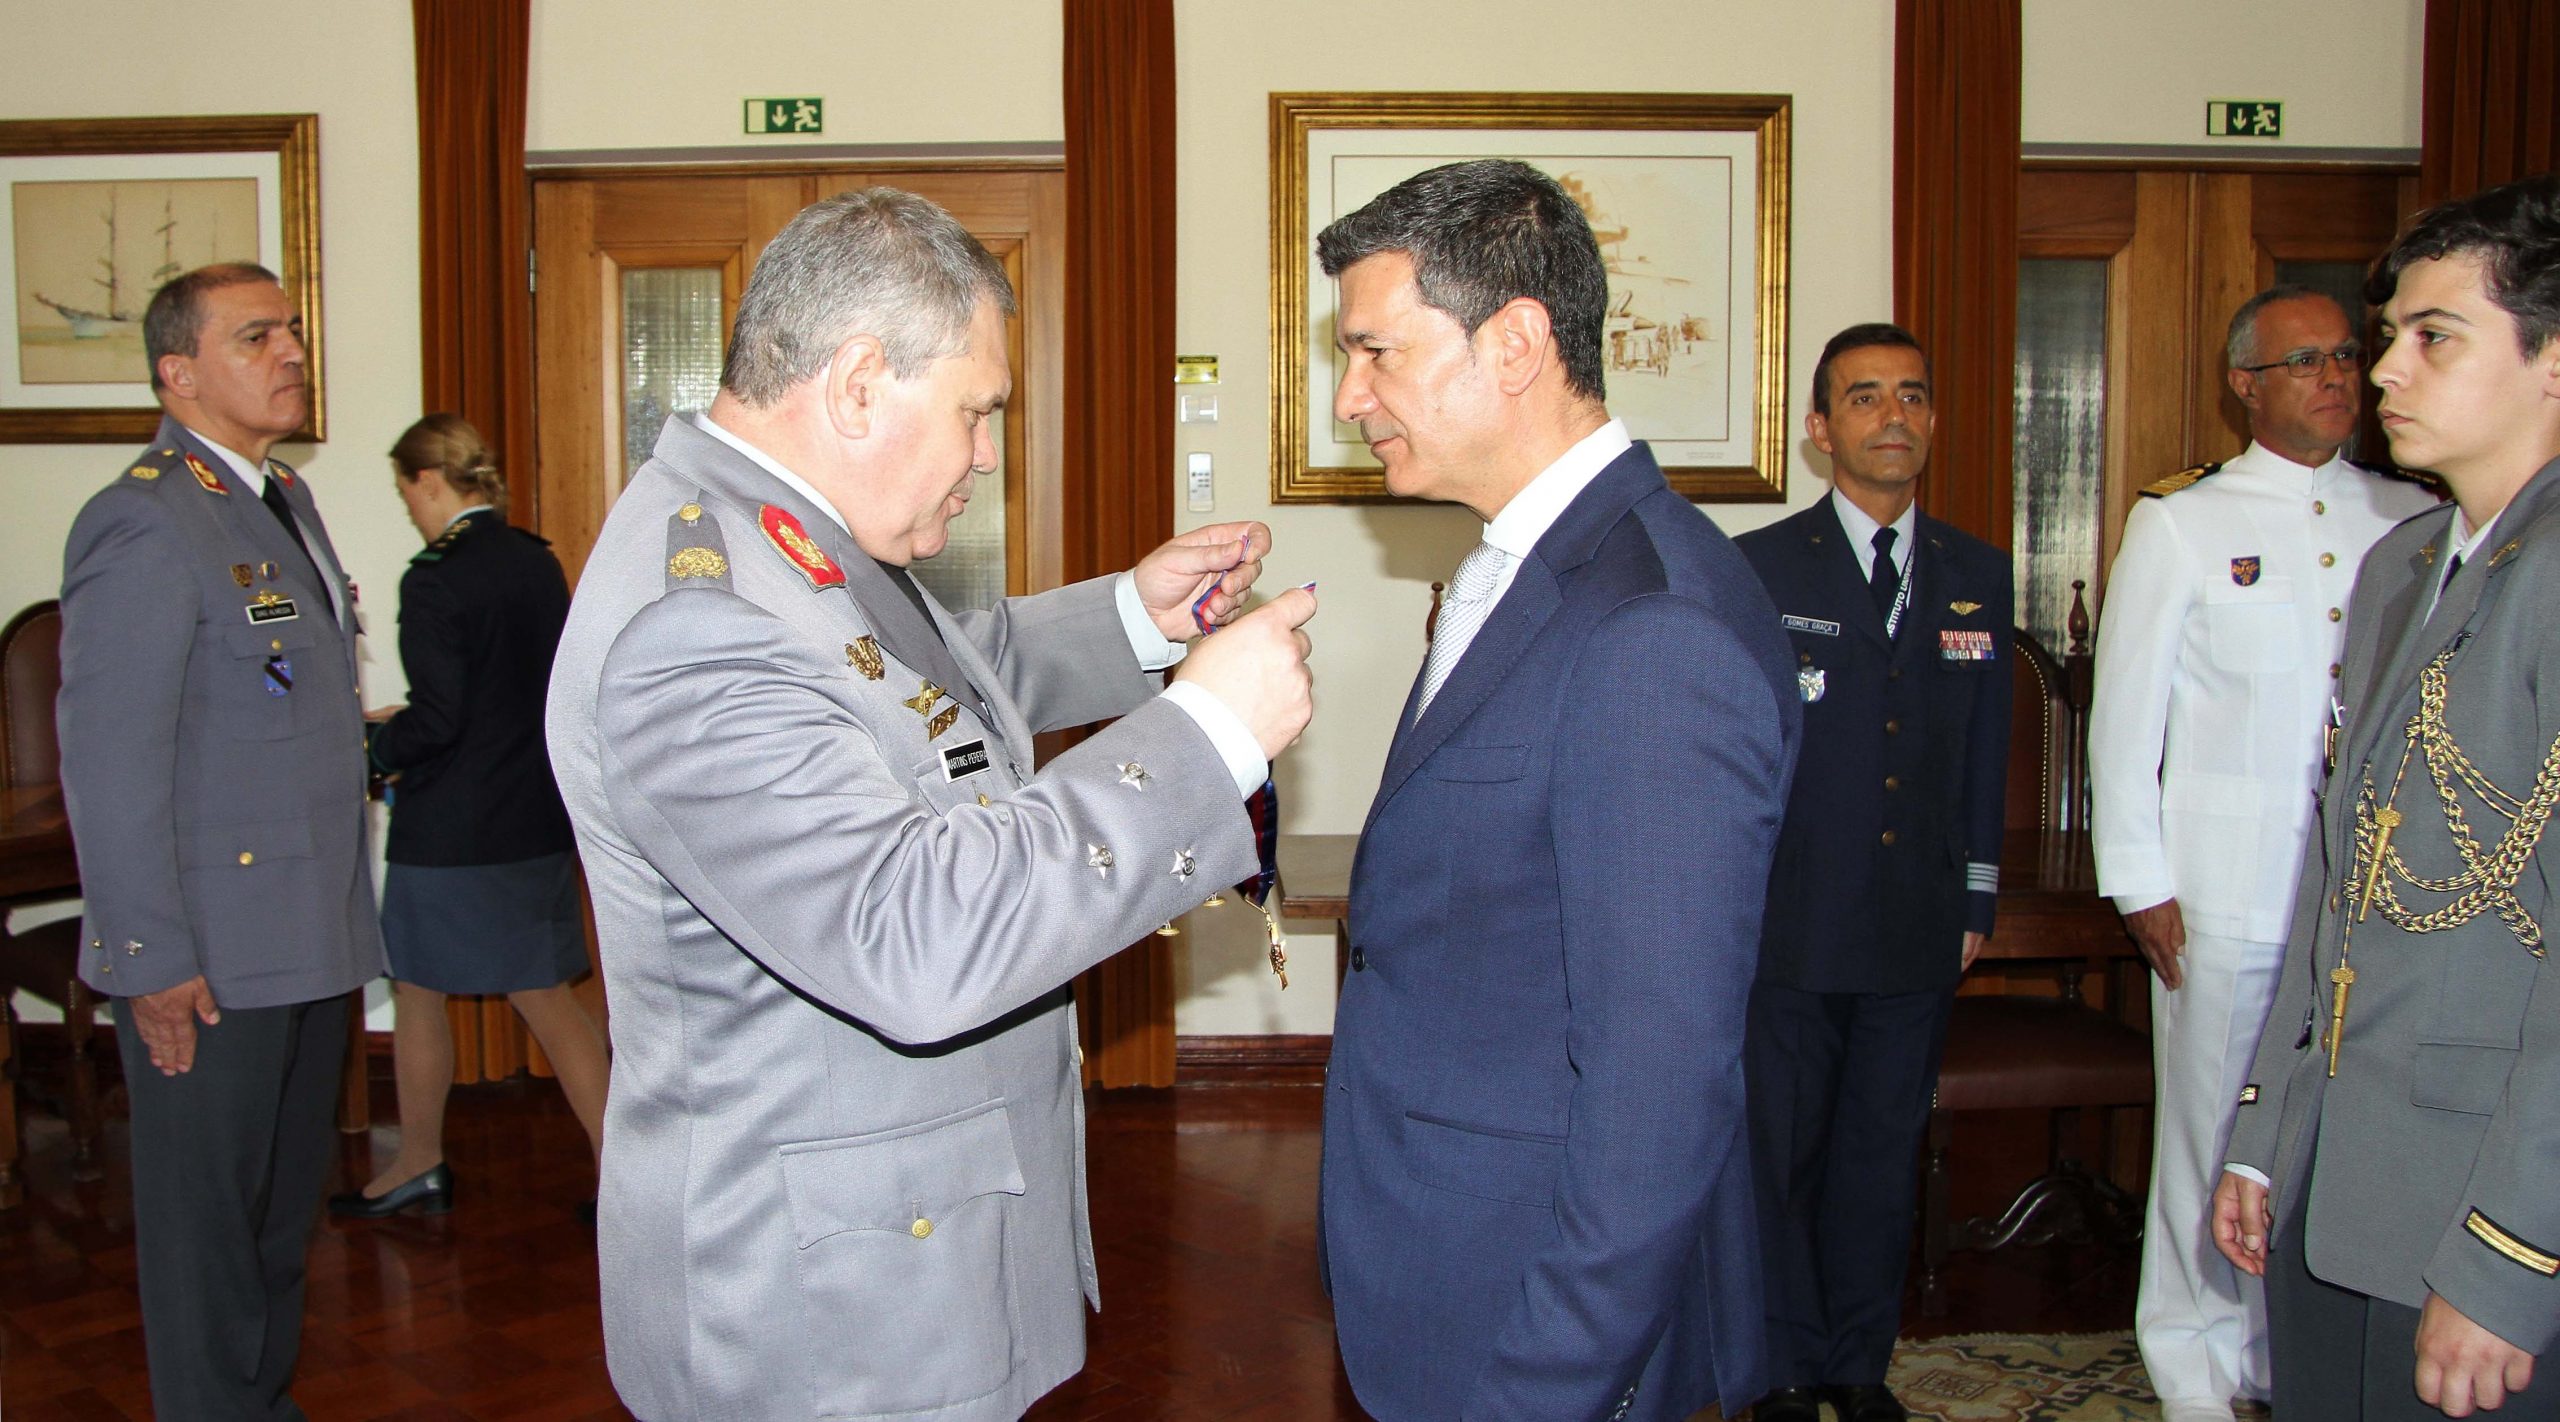 DISTINCTION WITH THE MEDAL OF THE CROSS OF SÃO JORGE TO PROF. LUIS TOMÉ